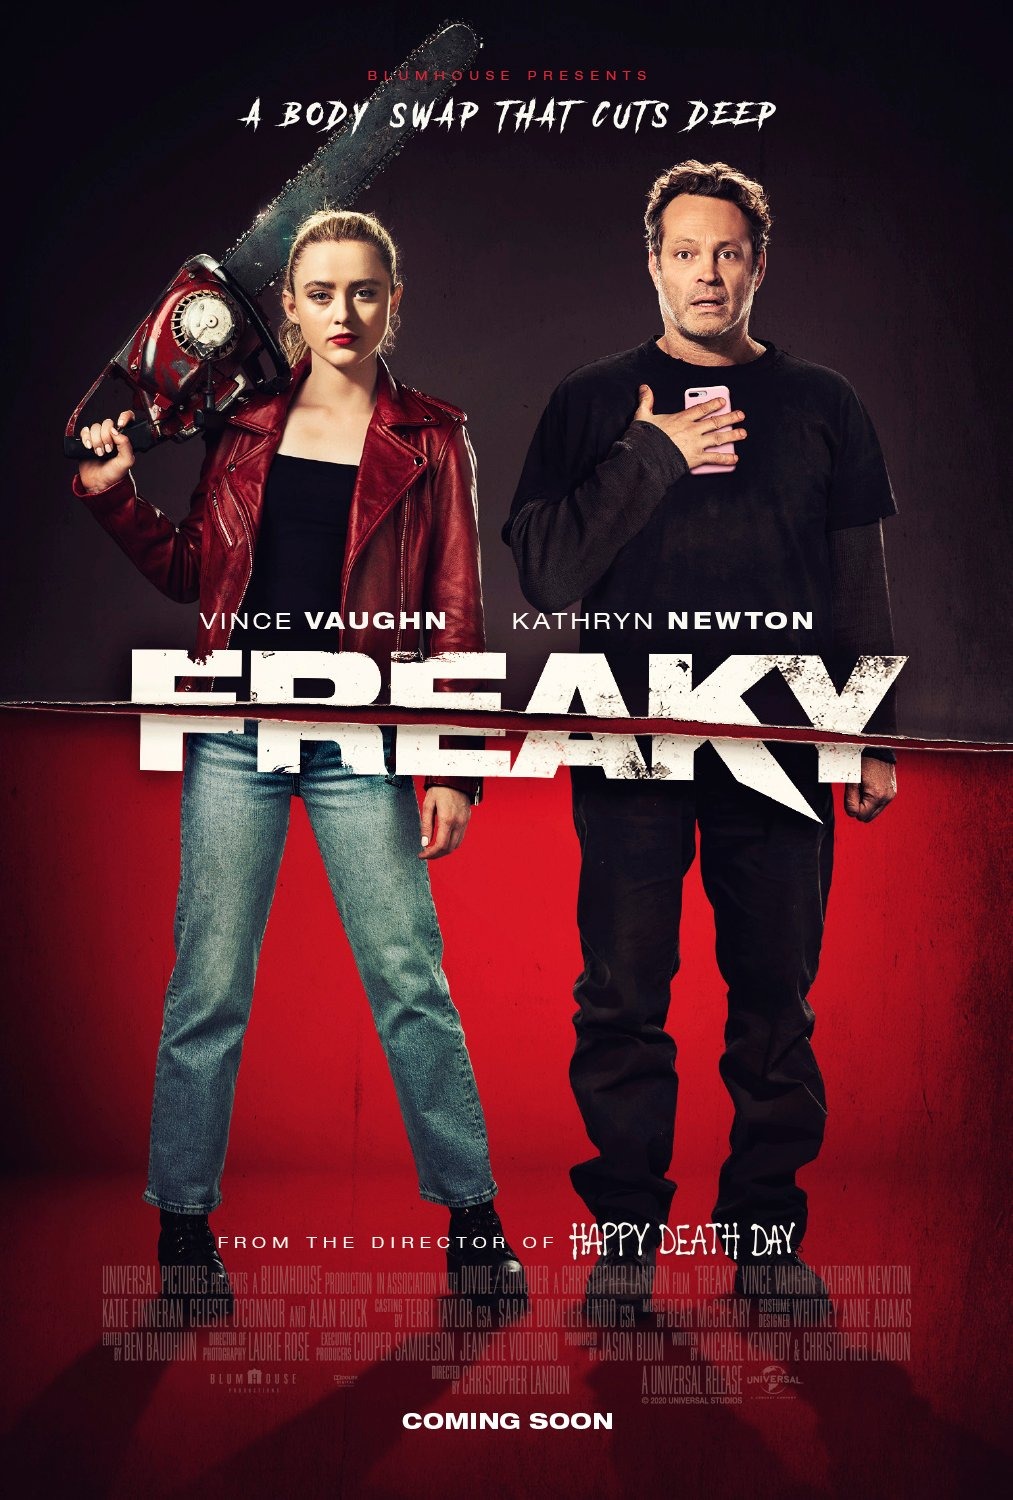 Freaky poster starring Vince Vaughn and Kathryn Newton